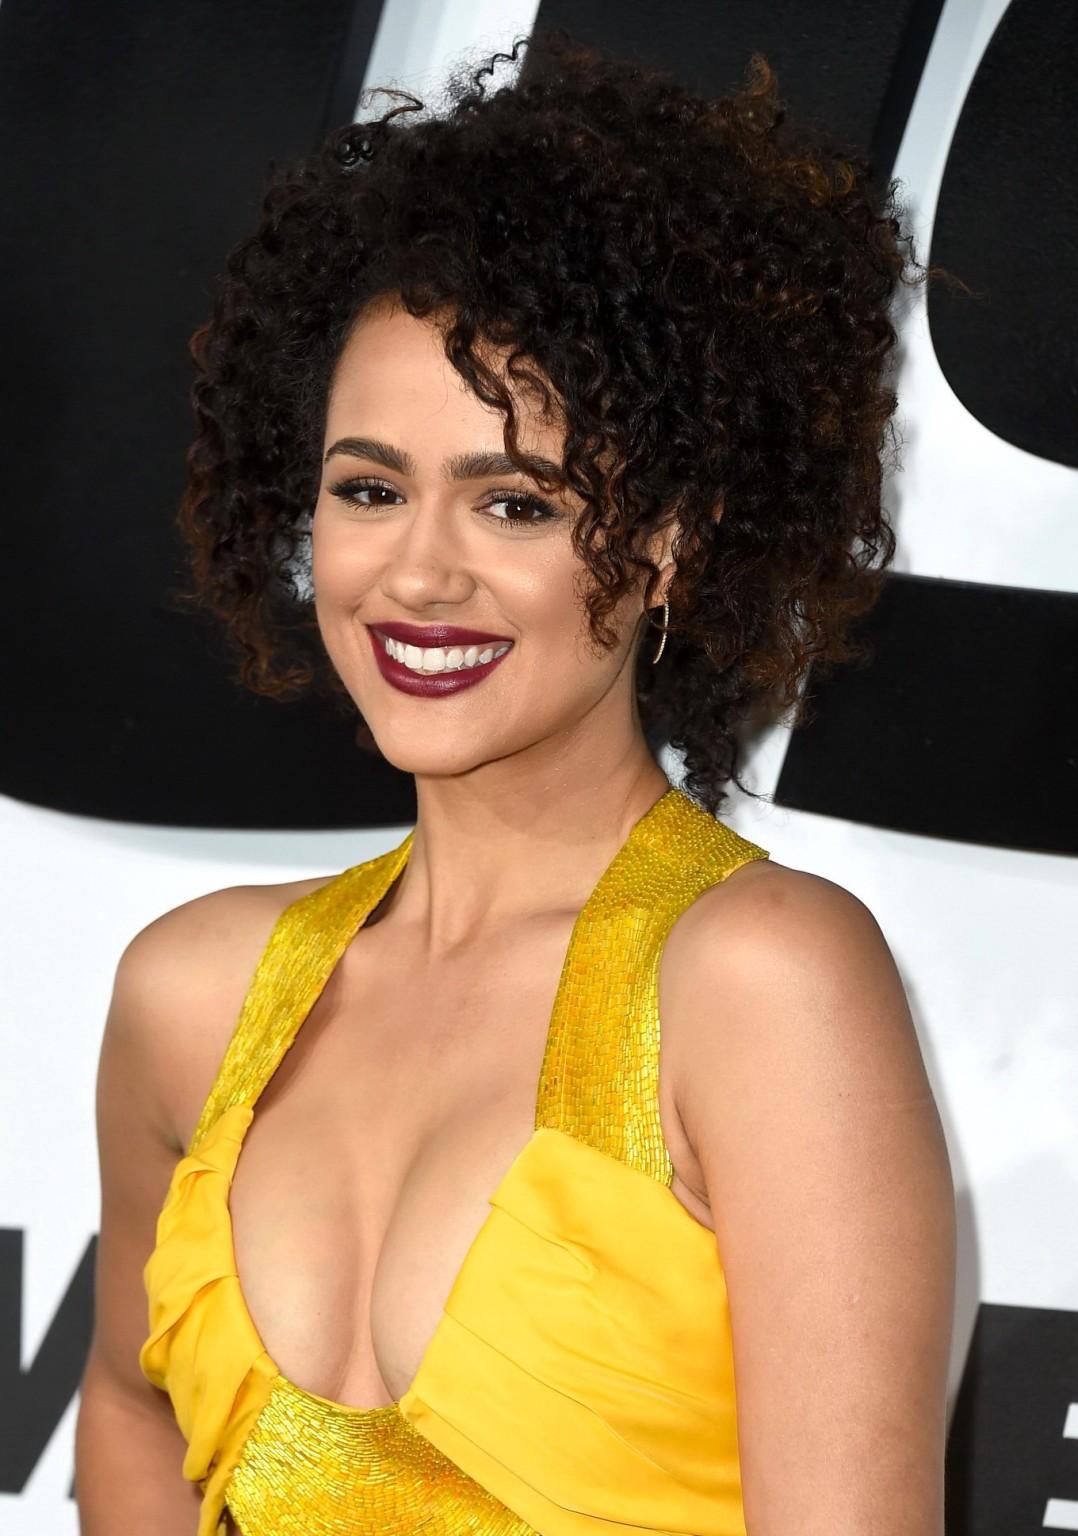 Nathalie Emmanuel showing huge cleavage at the Furious 7 premiere in Hollywood #75168414